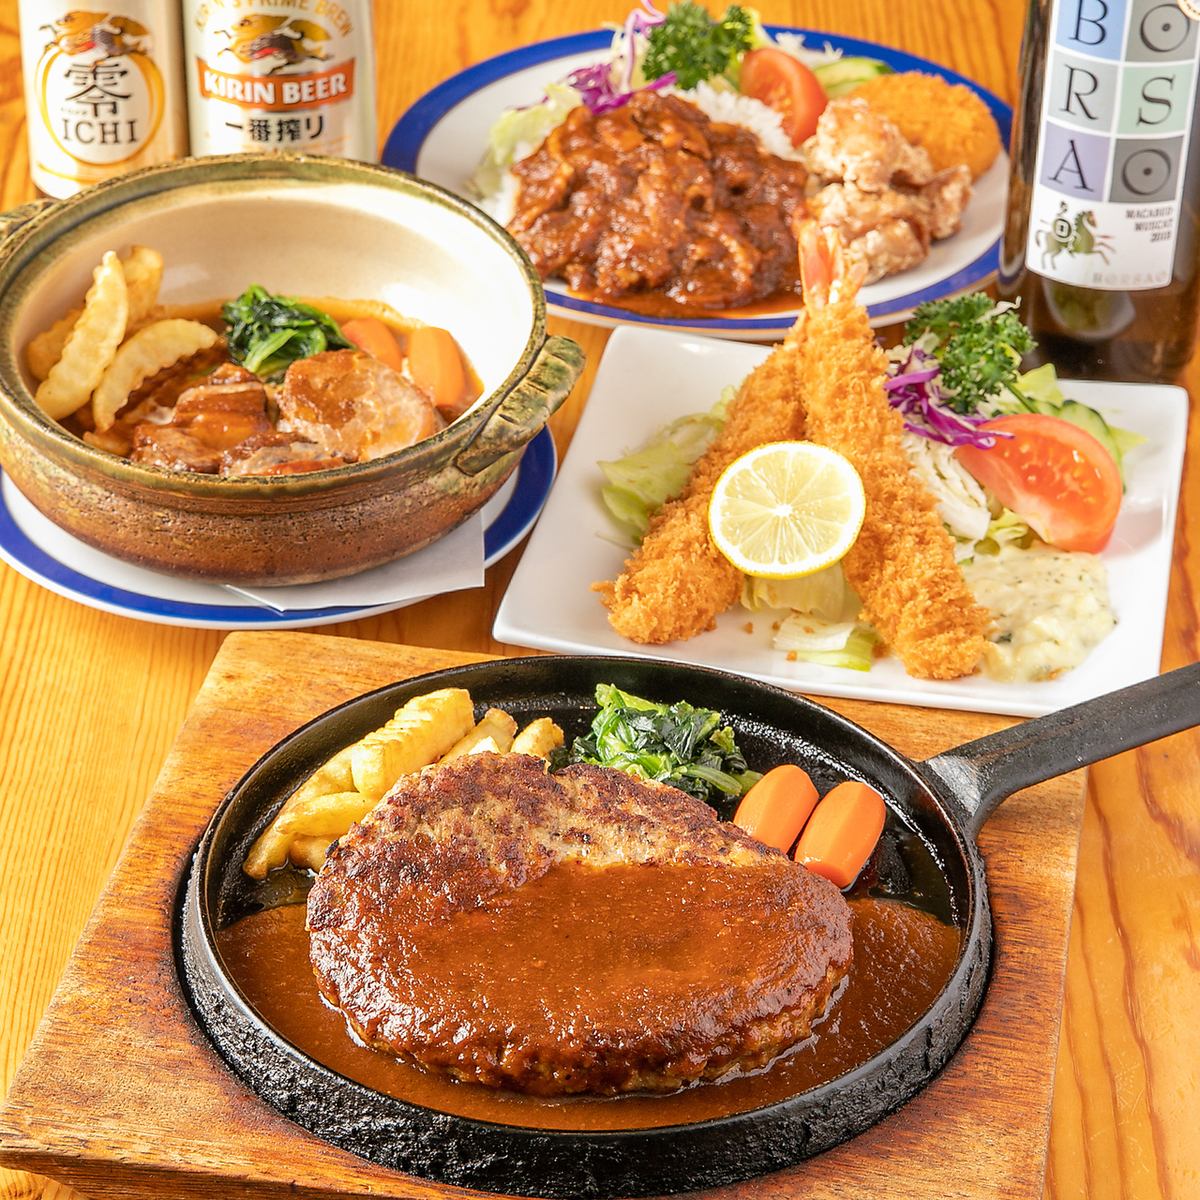 The taste since its establishment! The popular lava grill is exquisite ♪ We are proud of our rich menu!